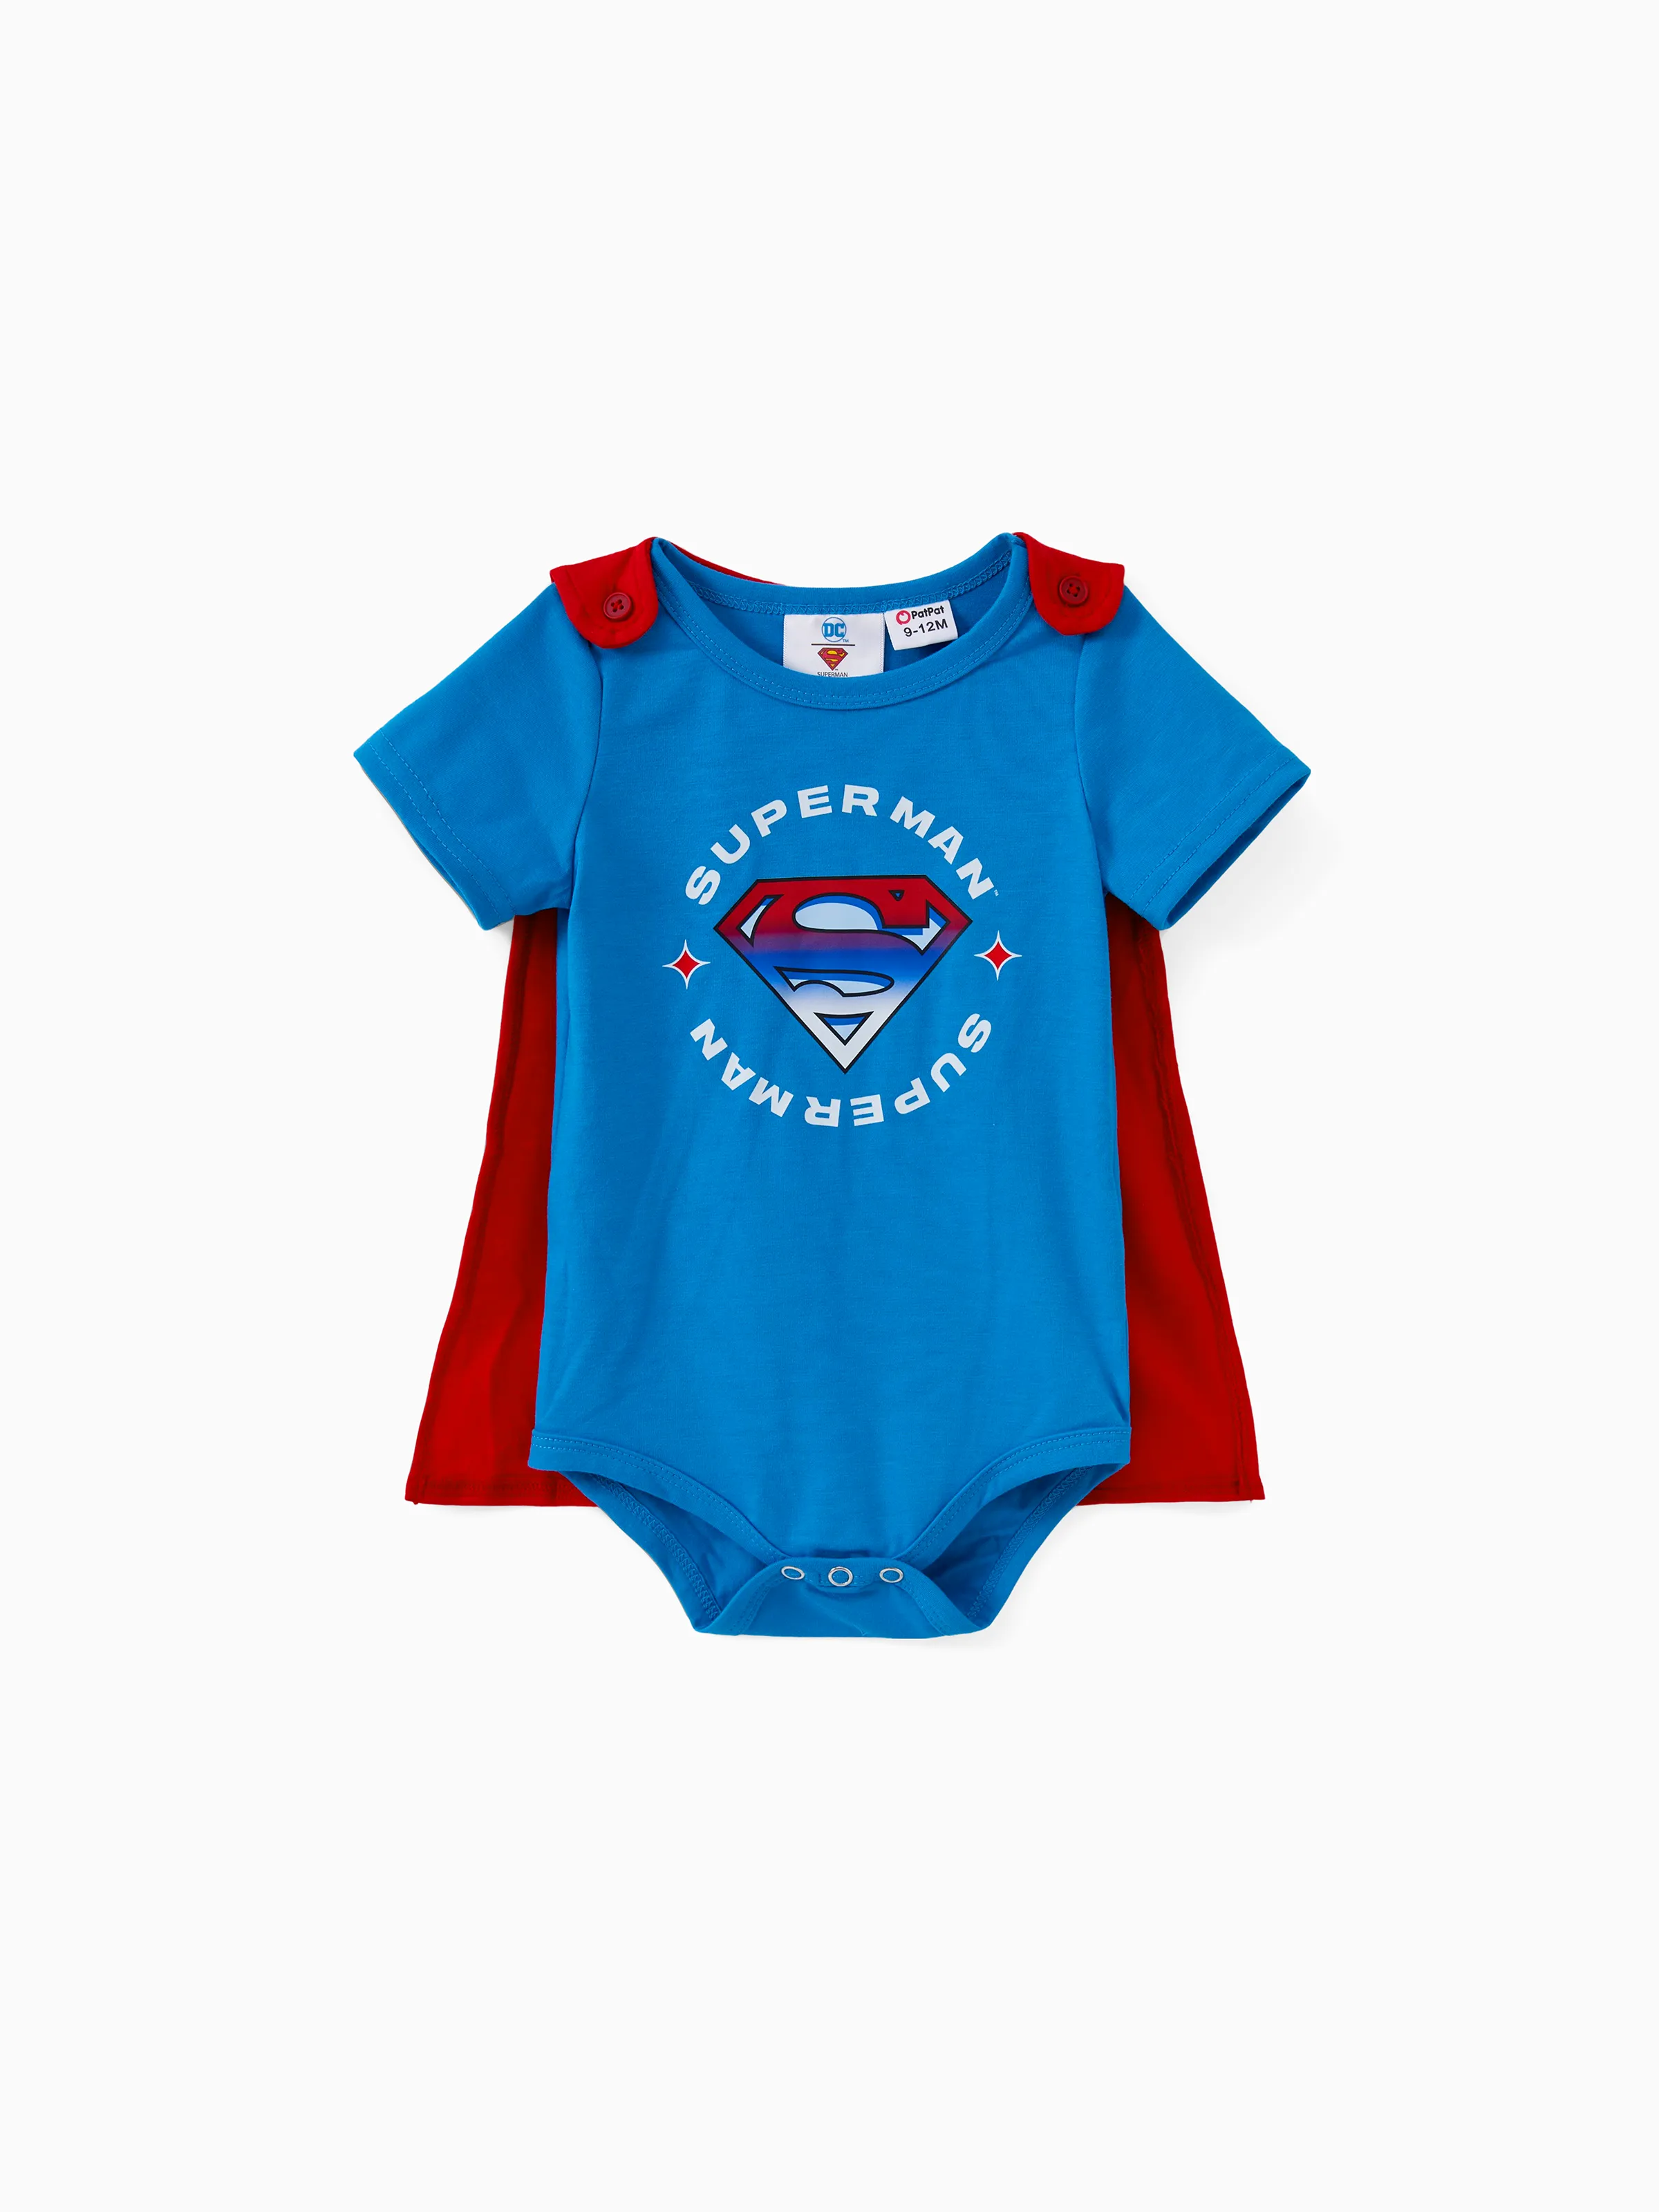 

Justice League Family Matching Cotton Superman Logo Print Tee/Onesie with Superman Cape